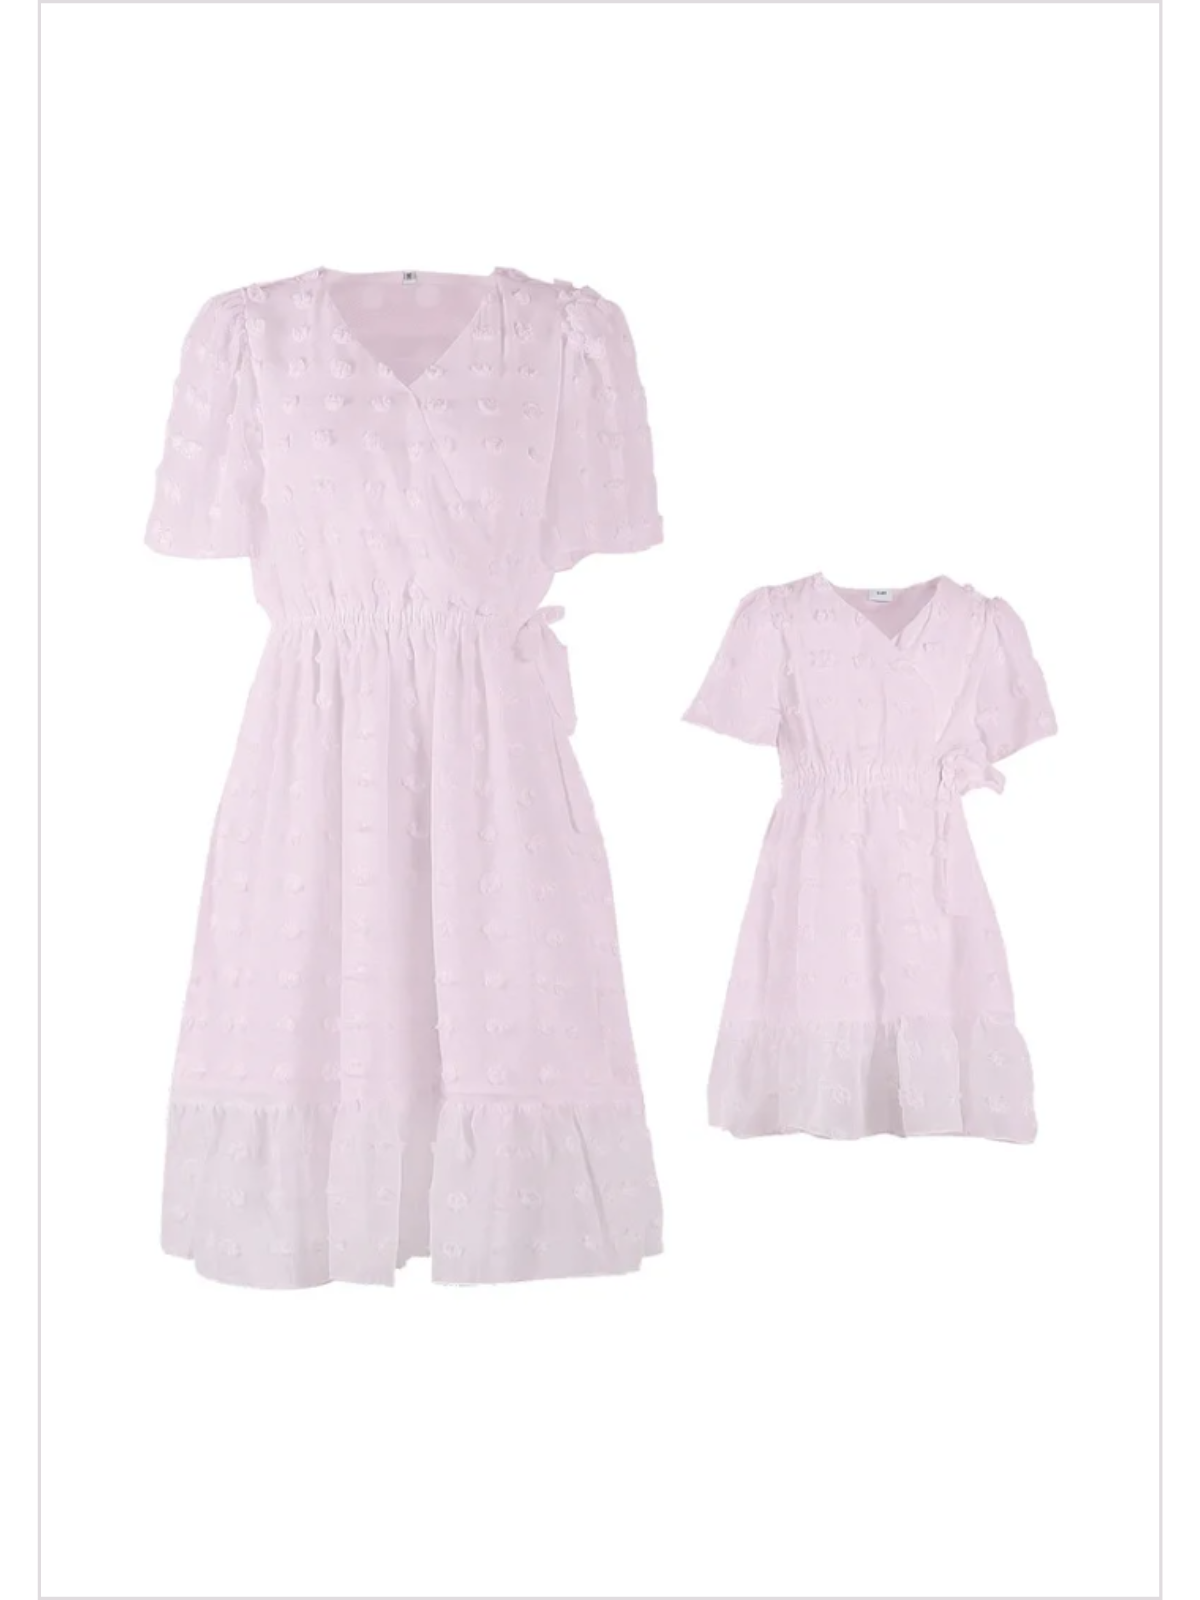 Mia Belle Girls Pom Pom Bubble Chiffon Dress | Mommy And Me Outfits